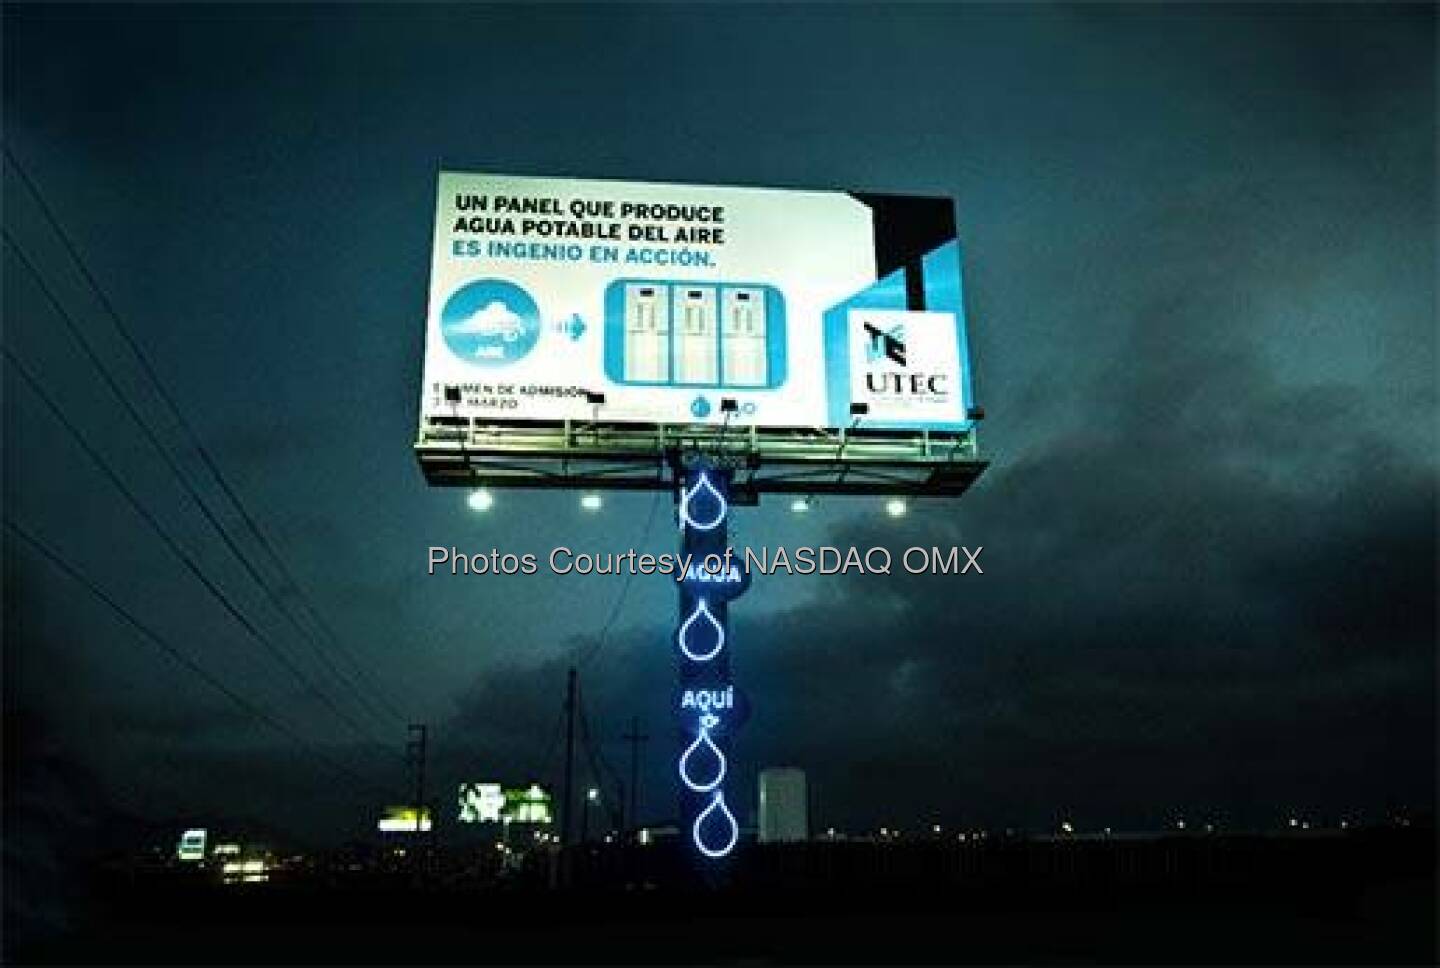 The billboard everyone is talking about. See how this specific form of advertising is providing clean drinking water to the people of the Bujama district in Lima, Peru. #FridayFun 

http://bit.ly/1mLwVWq  Source: http://facebook.com/NASDAQ